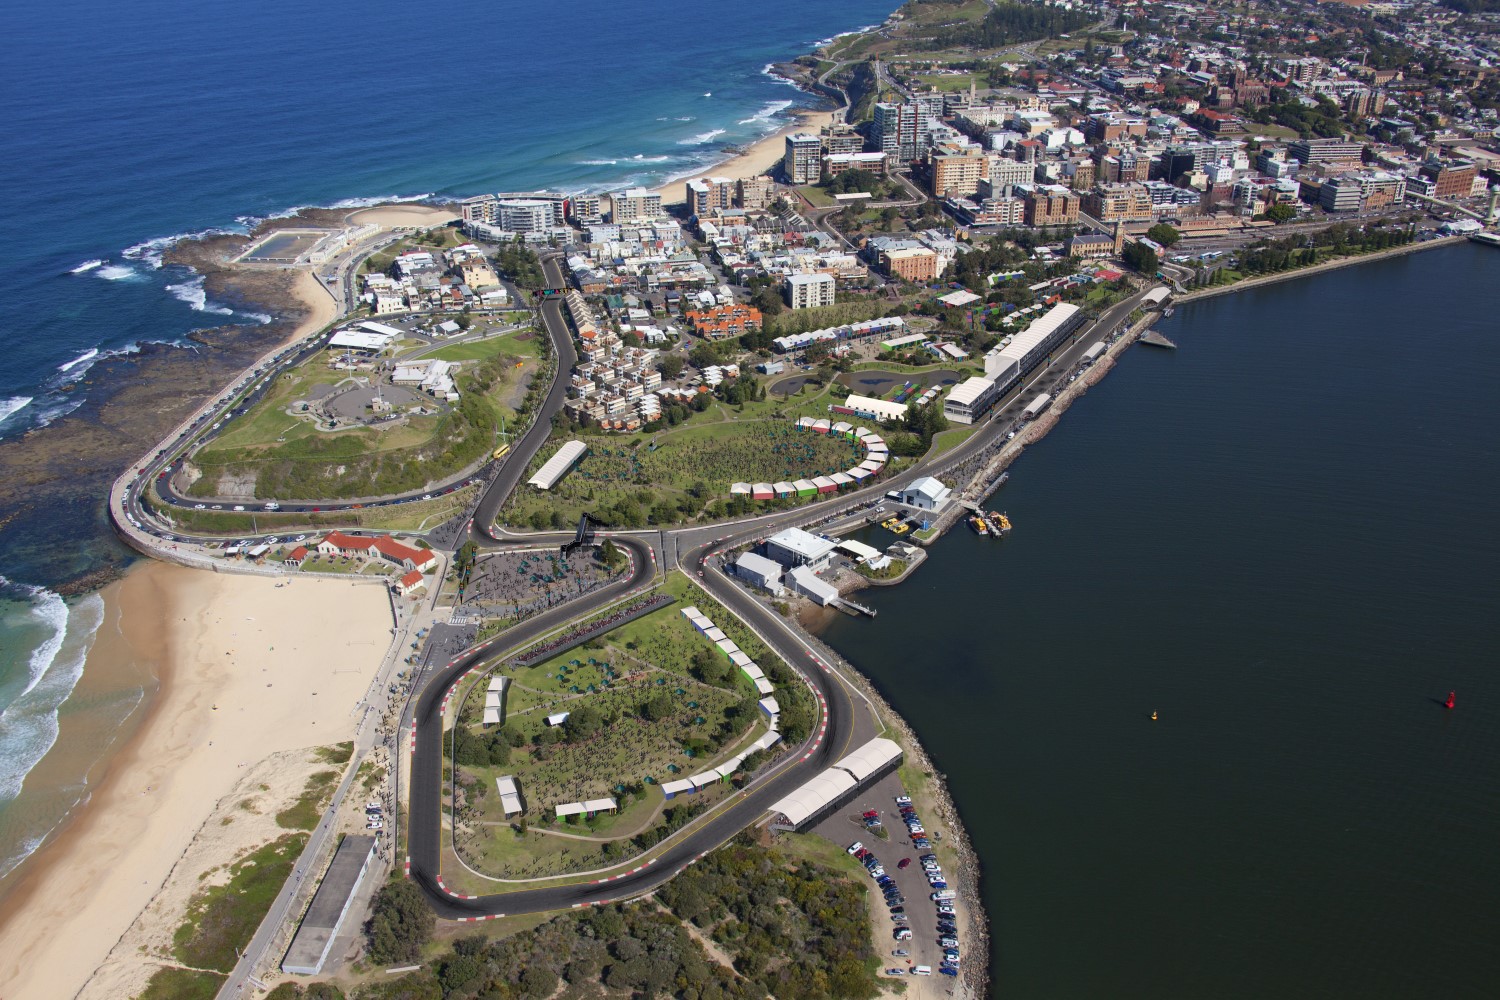 An artist's impression of the Newcastle street circuit that will host the finale of the Virgin Australia Supercars Championship from 2017